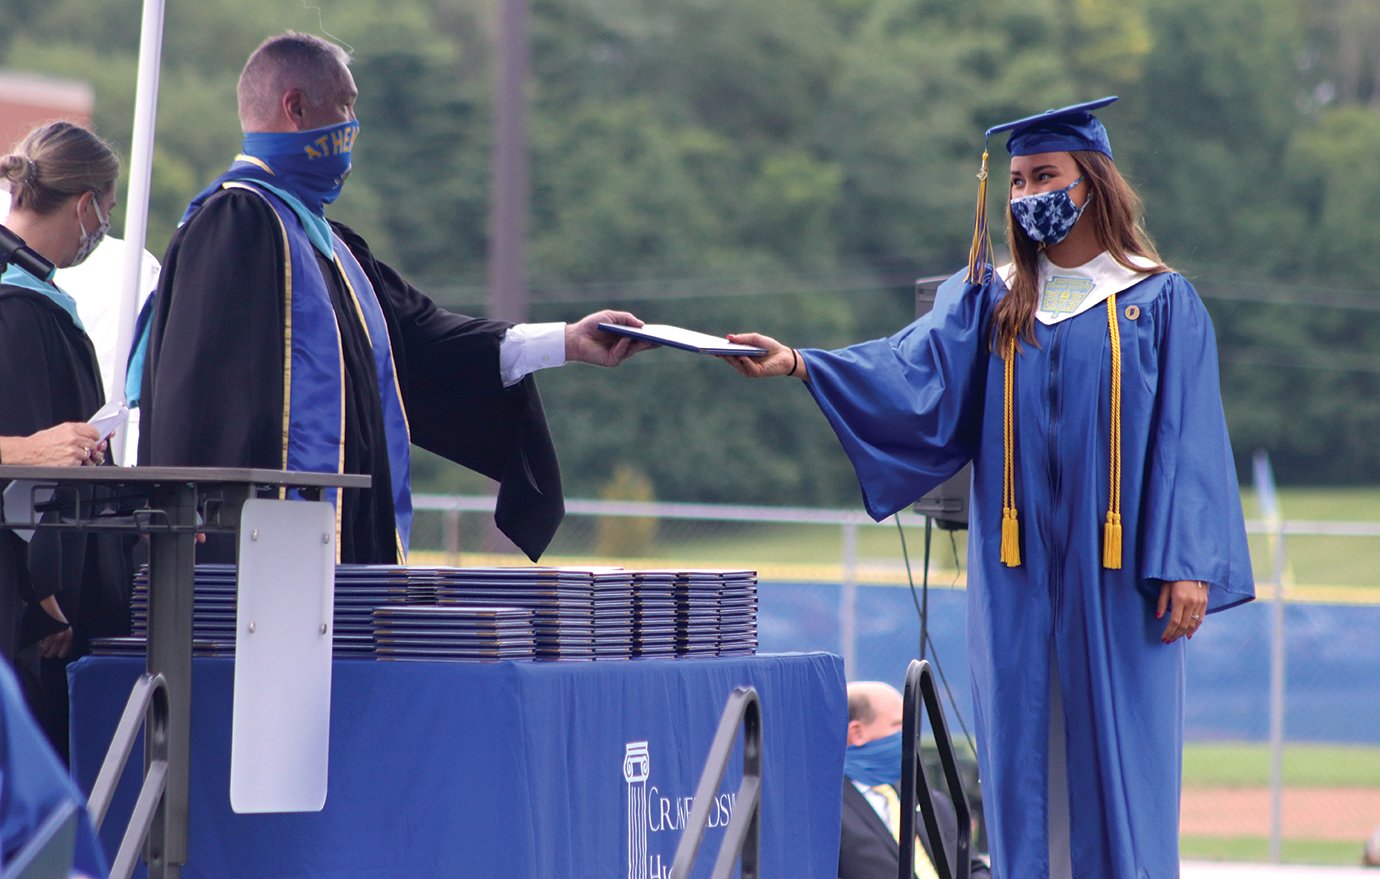 Crawfordsville graduate Abigail Bannon is one of the first to receive her diploma Saturday at Crawfordsville High School. The former Athenian seniors were all handed their eagerly anticipated diplomas from Principal Michael Cox.